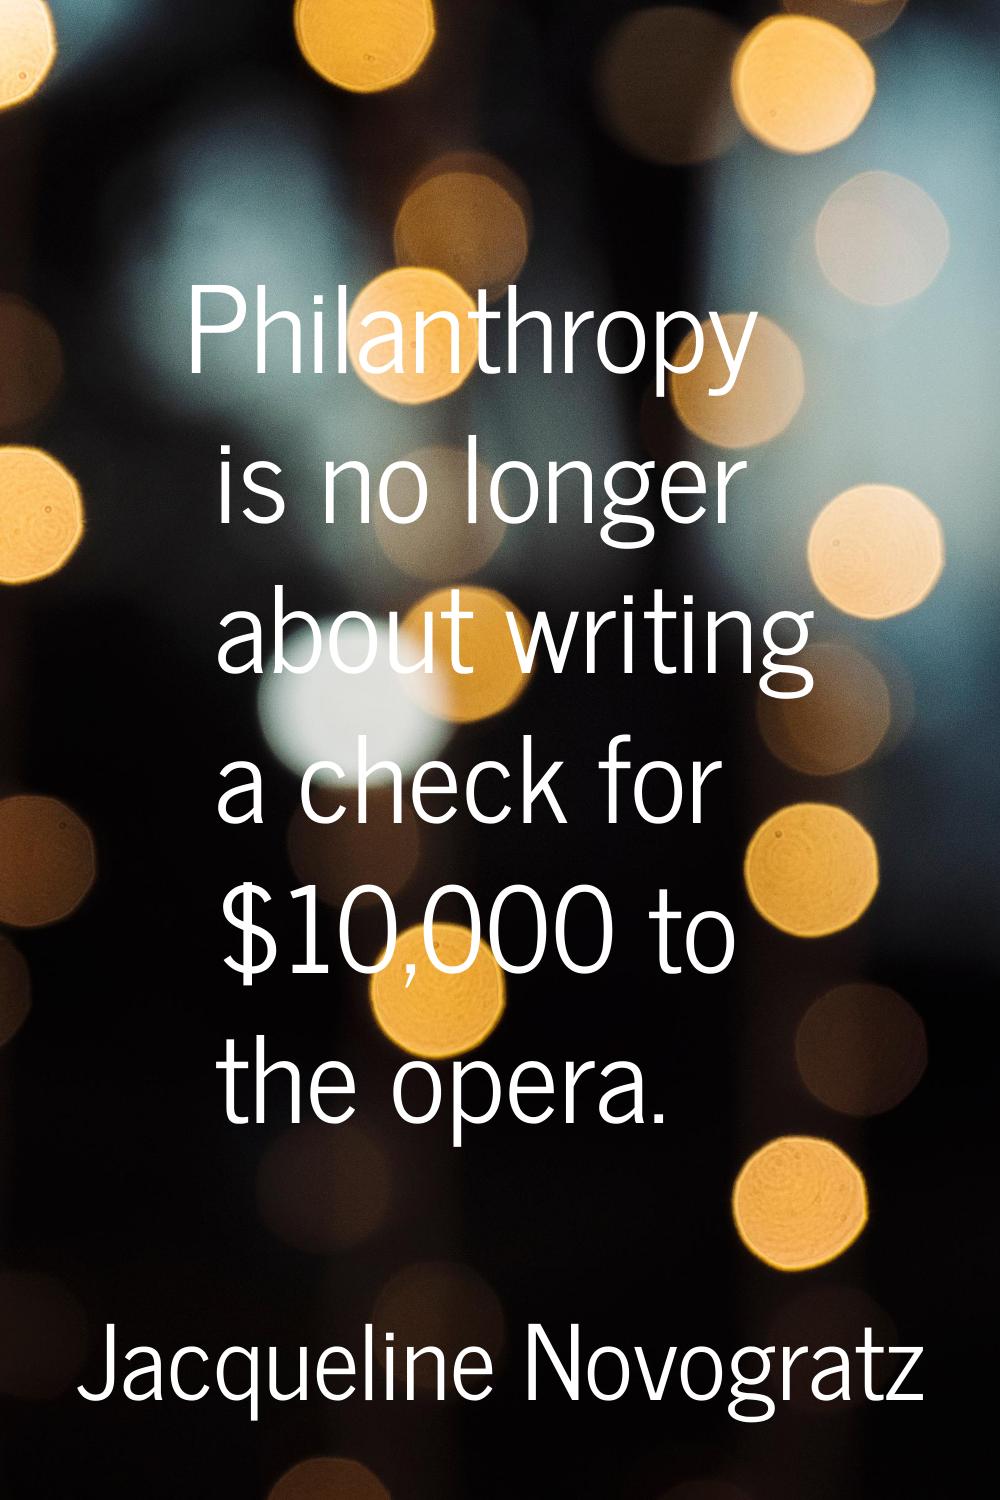 Philanthropy is no longer about writing a check for $10,000 to the opera.